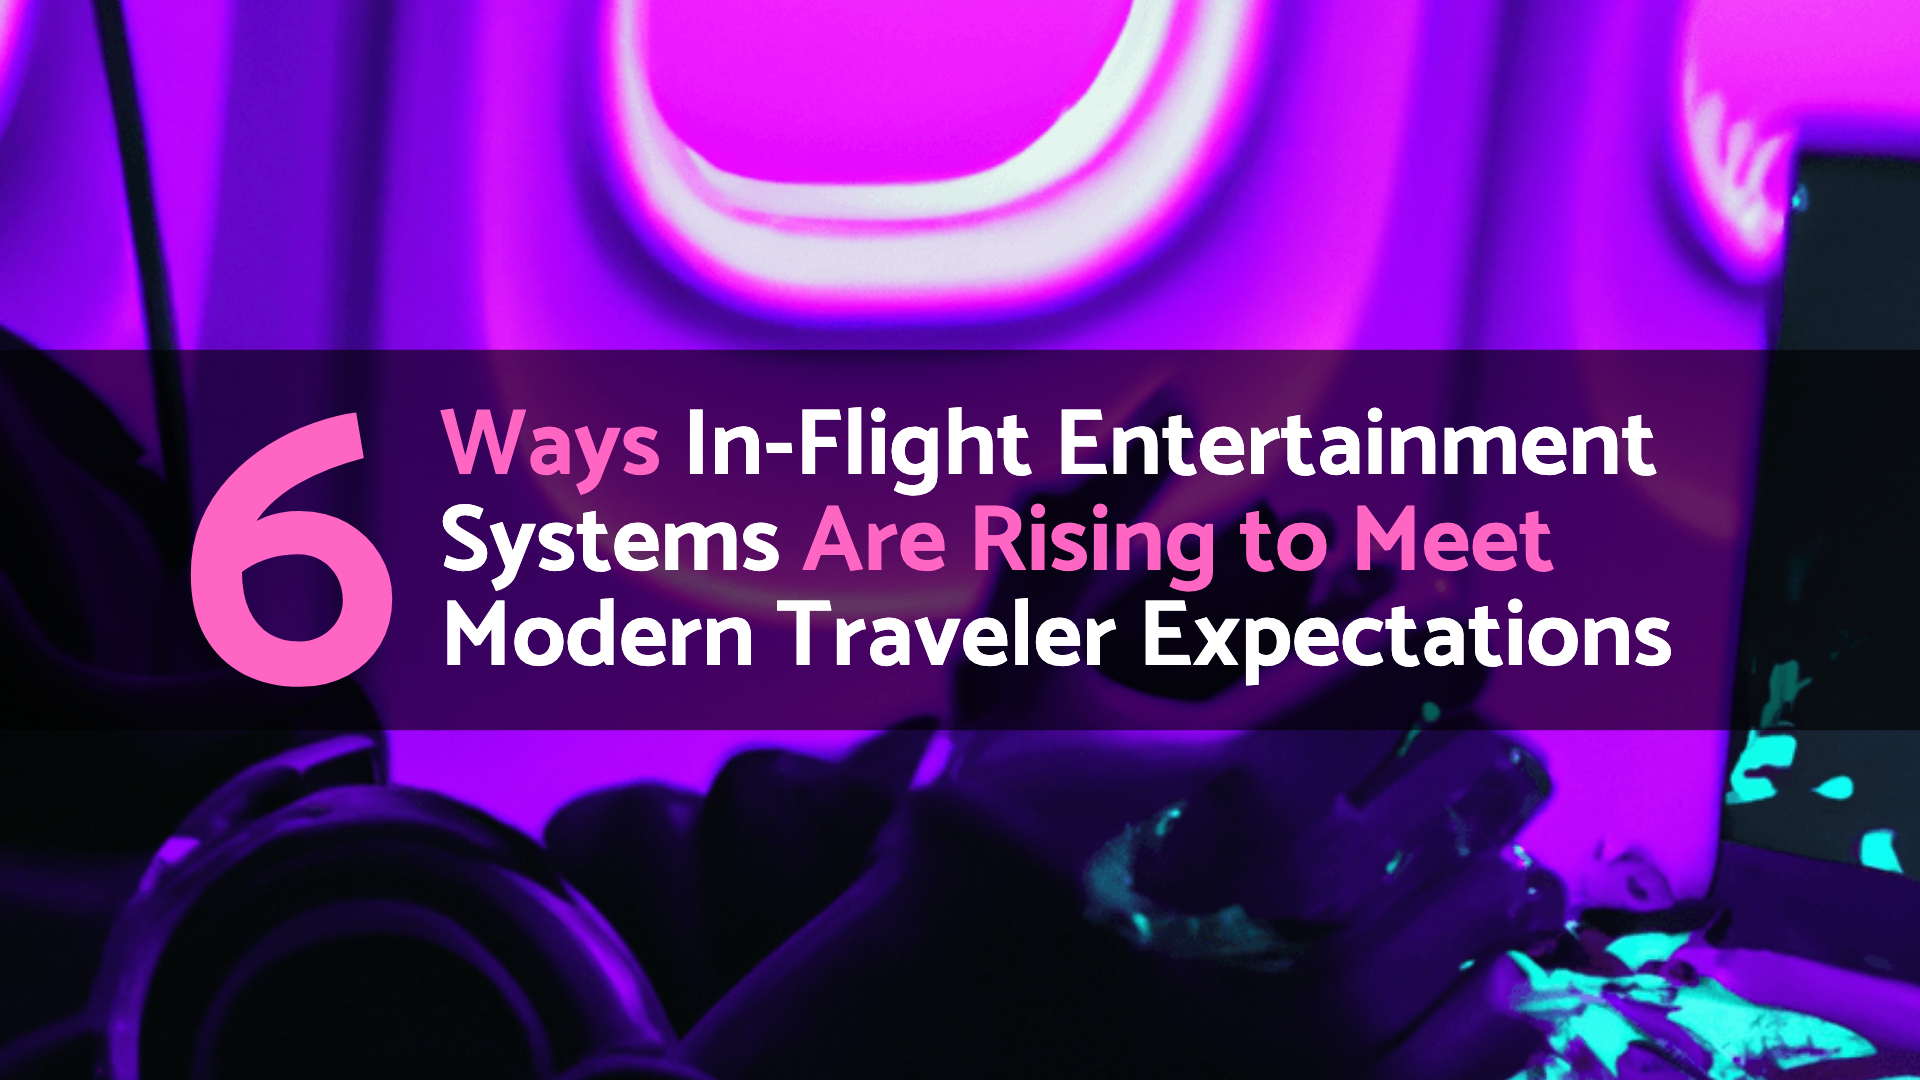 A purple-toned image of the inside of an airplane with a close-up of a passenger's hands using a device. Overlay text reads: "6 Ways In-Flight Entertainment Systems Are Rising to Meet Modern Traveler Expectations.